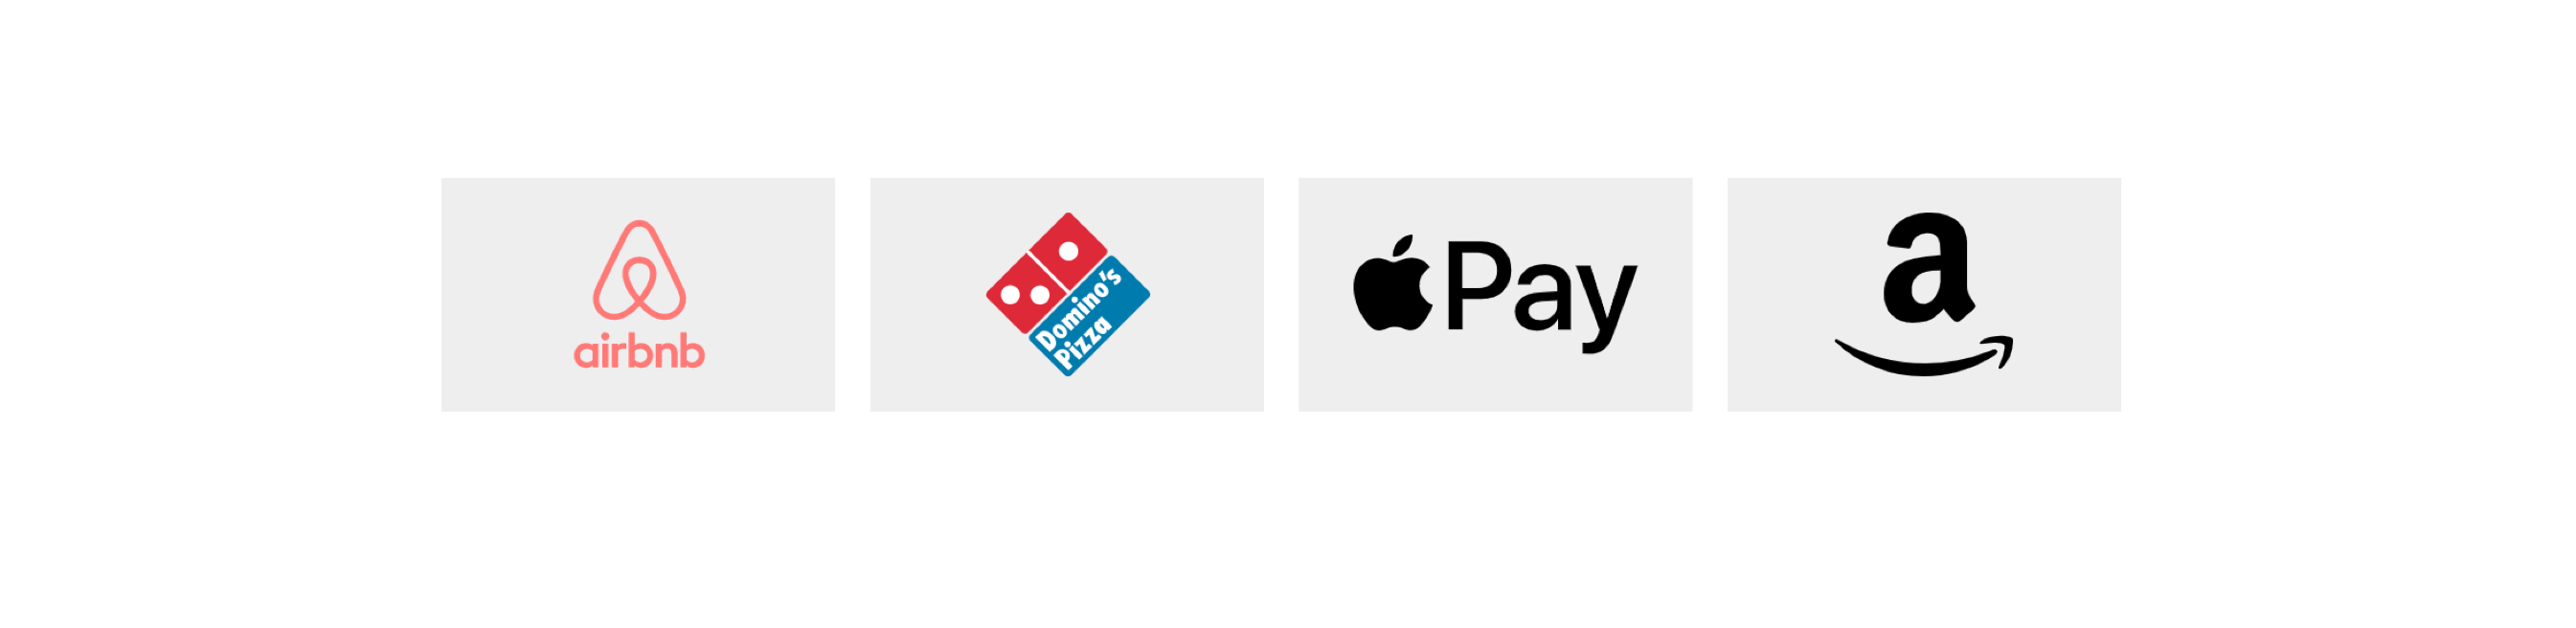 A list of logos: Airbnb, Domino’s Pizza, Apple Pay, Amazon 